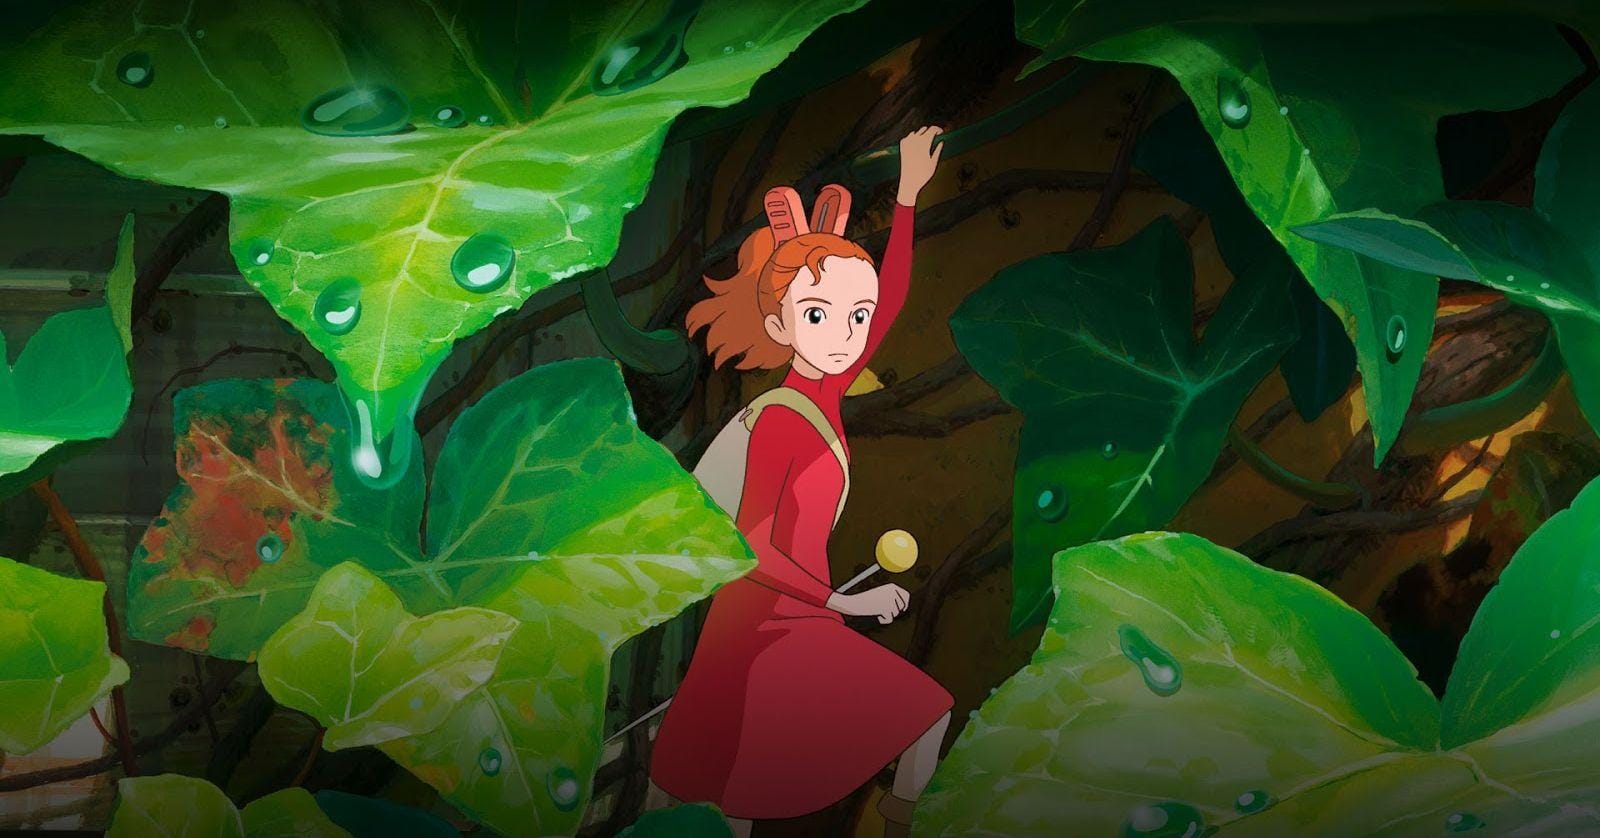 11 Underrated Studio Ghibli Films You Haven't Seen But Really Should